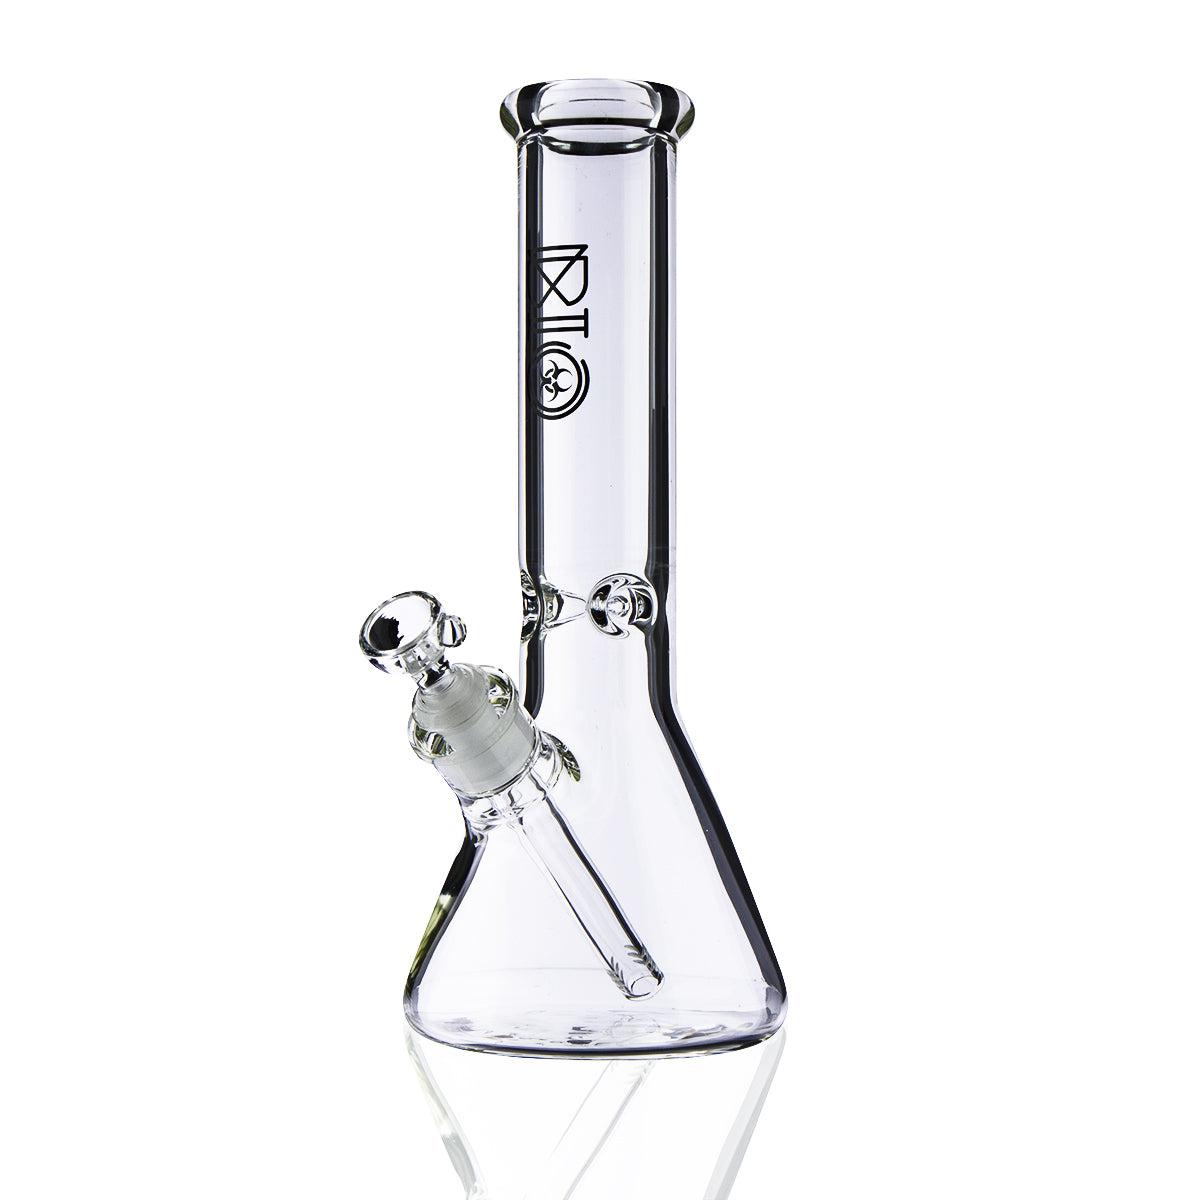 New Europe And Americaglass Pipe Bubbler Smoking Pipe Water Glass Bong  Color Double Bubble Base Snake Pot From Wzq888, $3.5